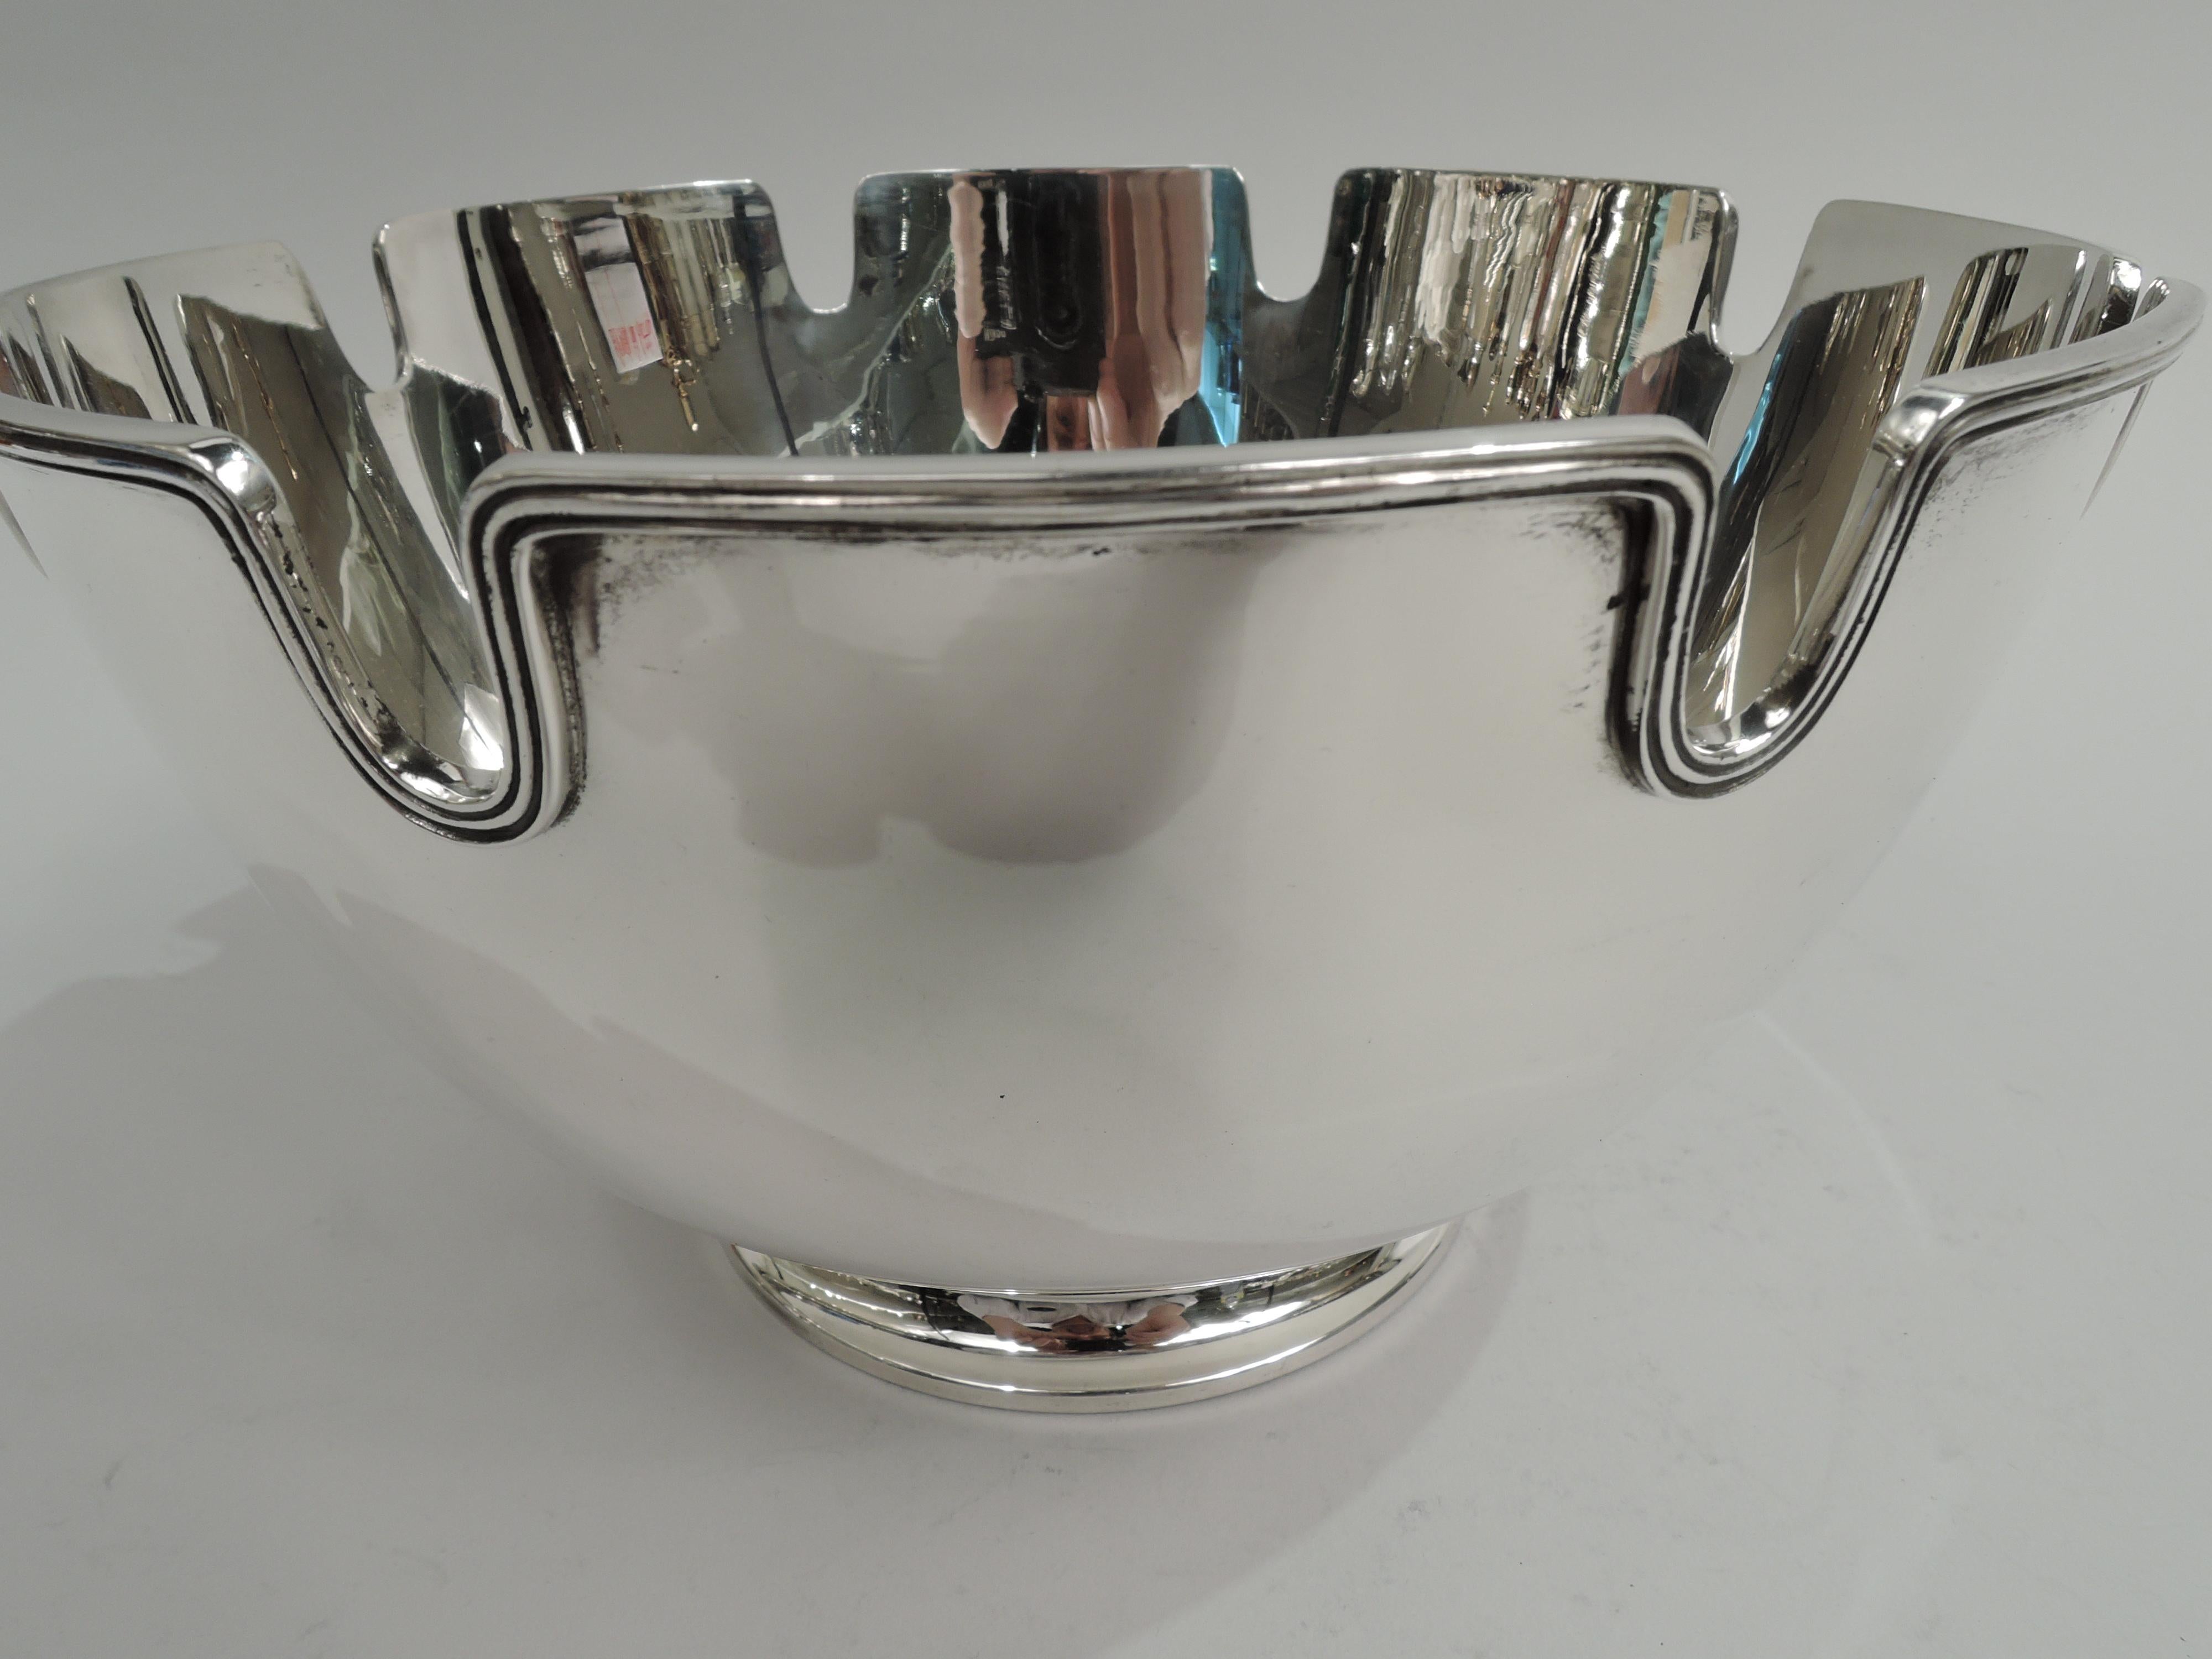 Mid-Century Modern sterling silver monteith bowl. Made by Tiffany & Co. in New York. Curved sides and reeded curvilinear rim; raised and spread foot. Stylish for serving and presentation. Plenty of room for engraving. Fully marked including maker’s